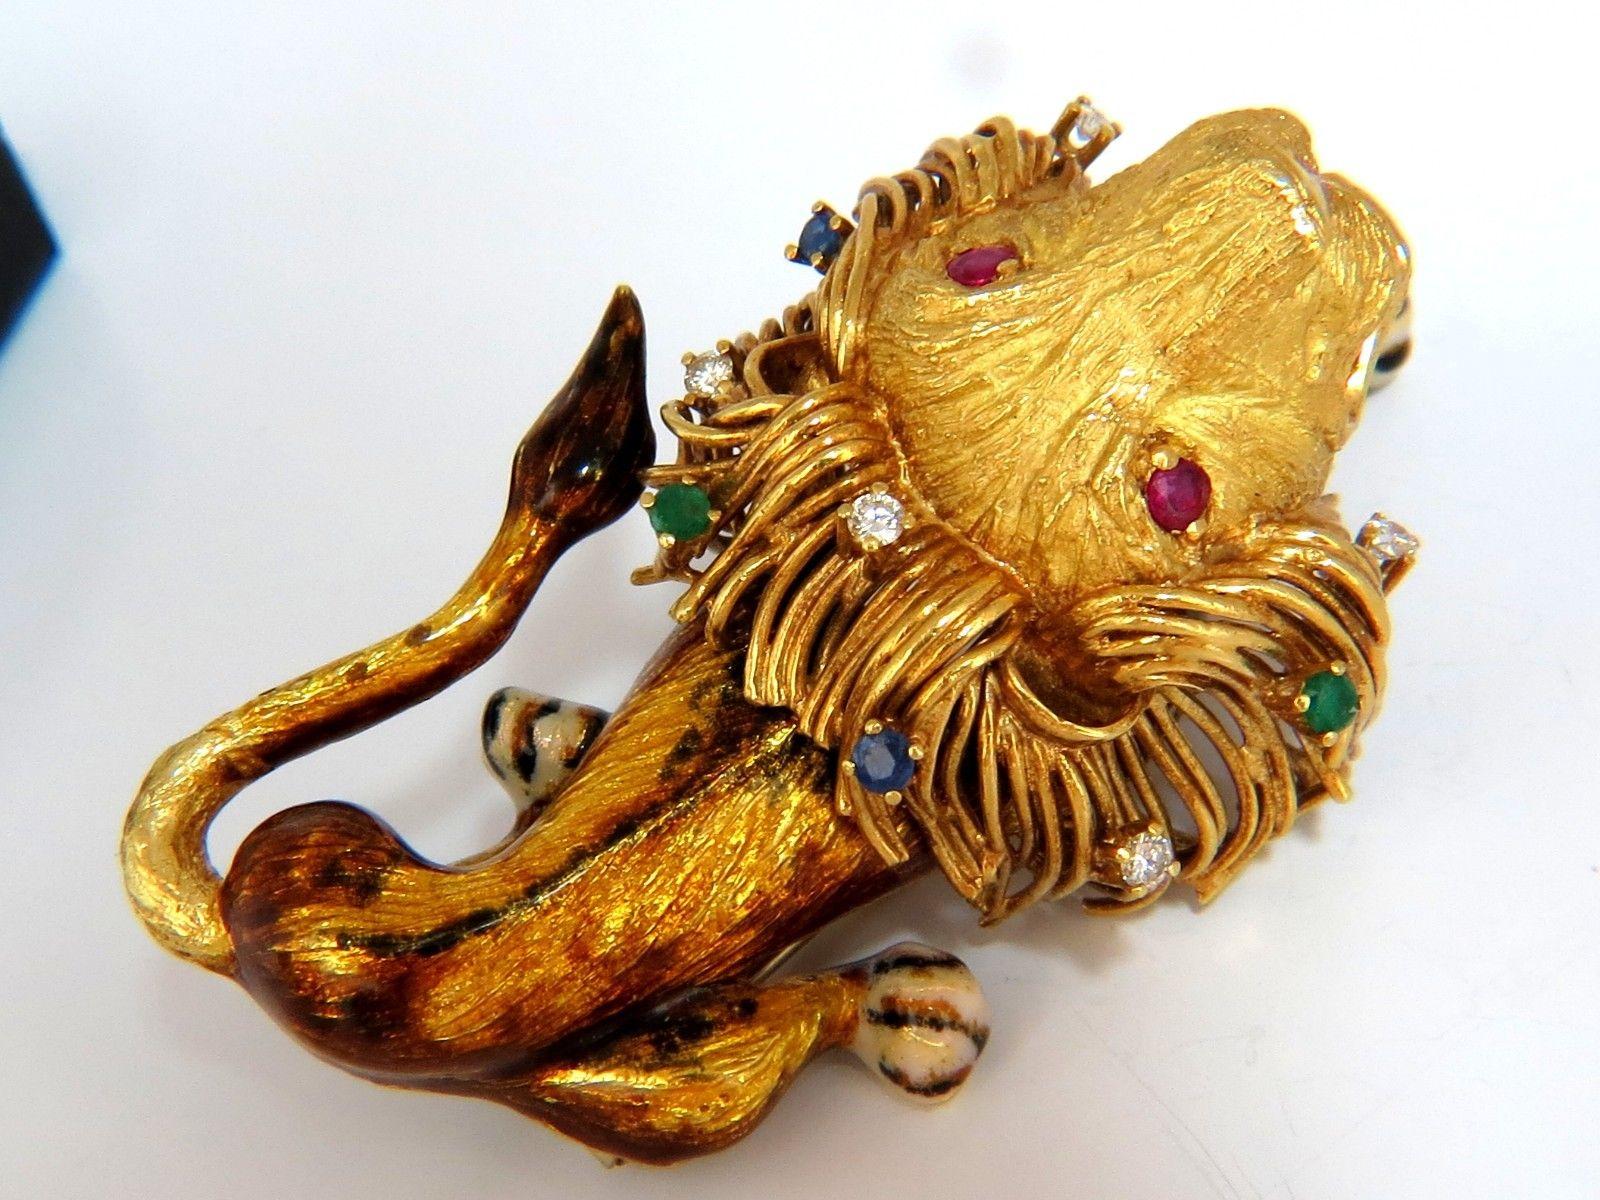 Monarch Divine

.50ct. diamonds Lion Brooch pin.

Rounds, Full cut Brilliant.

G-color Vs-2 clarity.

Additional .50ct Natural Ruby, sapphire and emeralds.

18kt yellow gold 

61.5 grams.

Overall: 2.9 X 1.45 inch

Depth: 1.35 inch

Excellent made